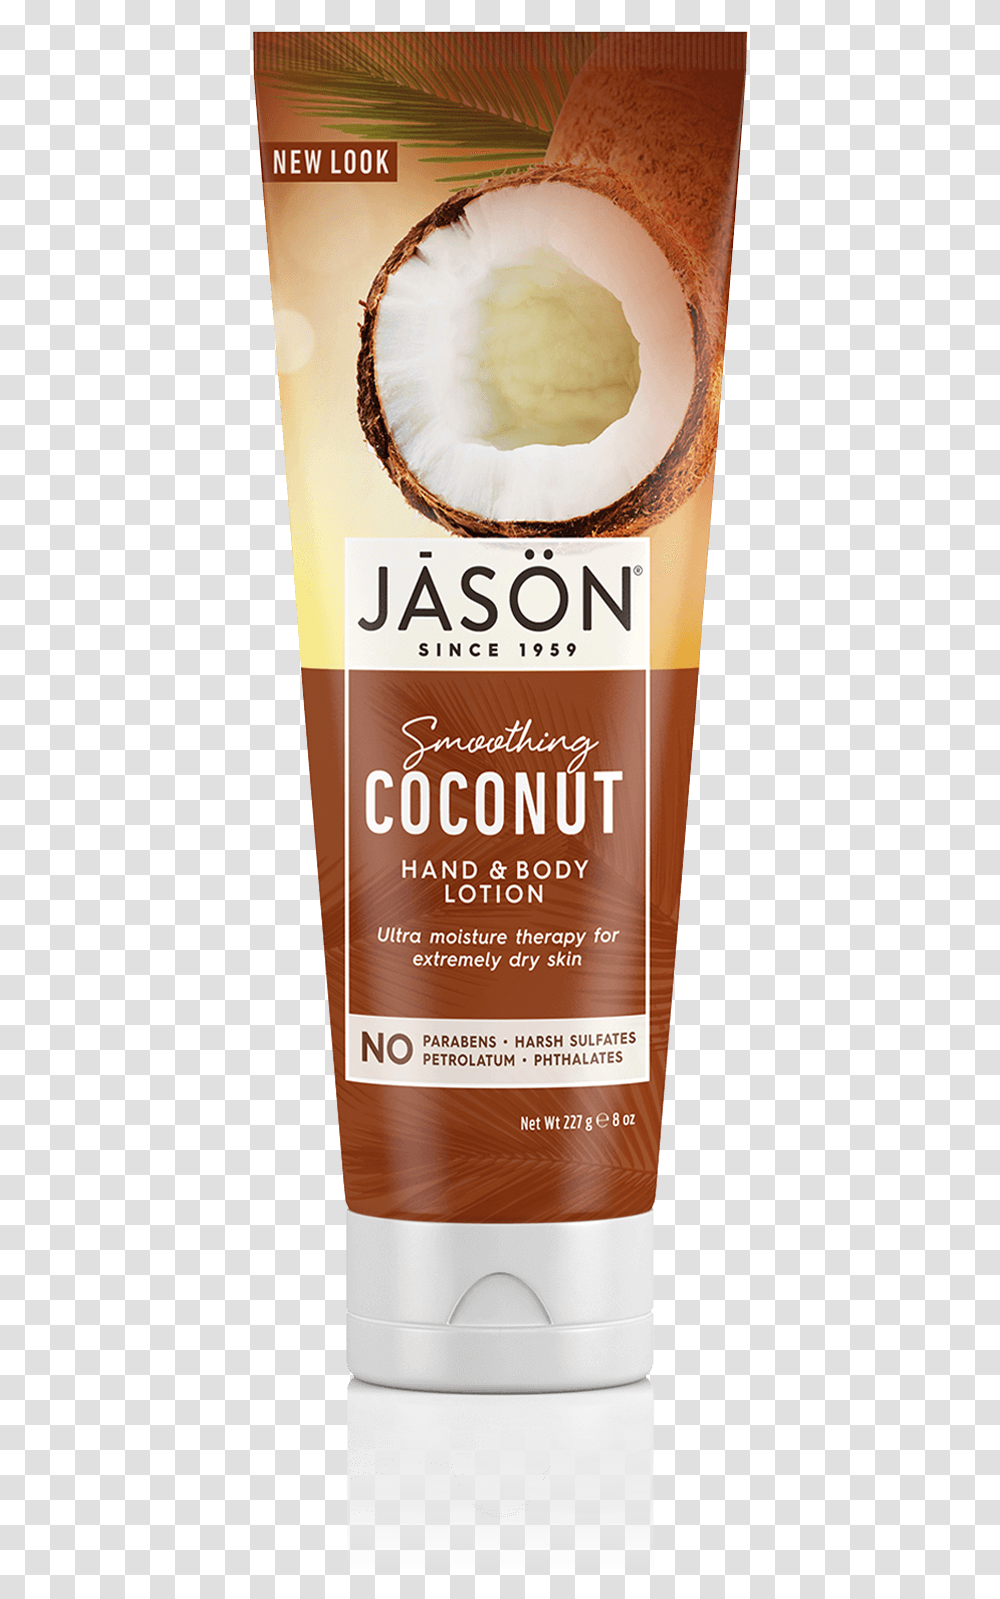 Jason Softening Cocoa Butter Hand And Body Lotion, Bottle, Sunscreen, Cosmetics Transparent Png